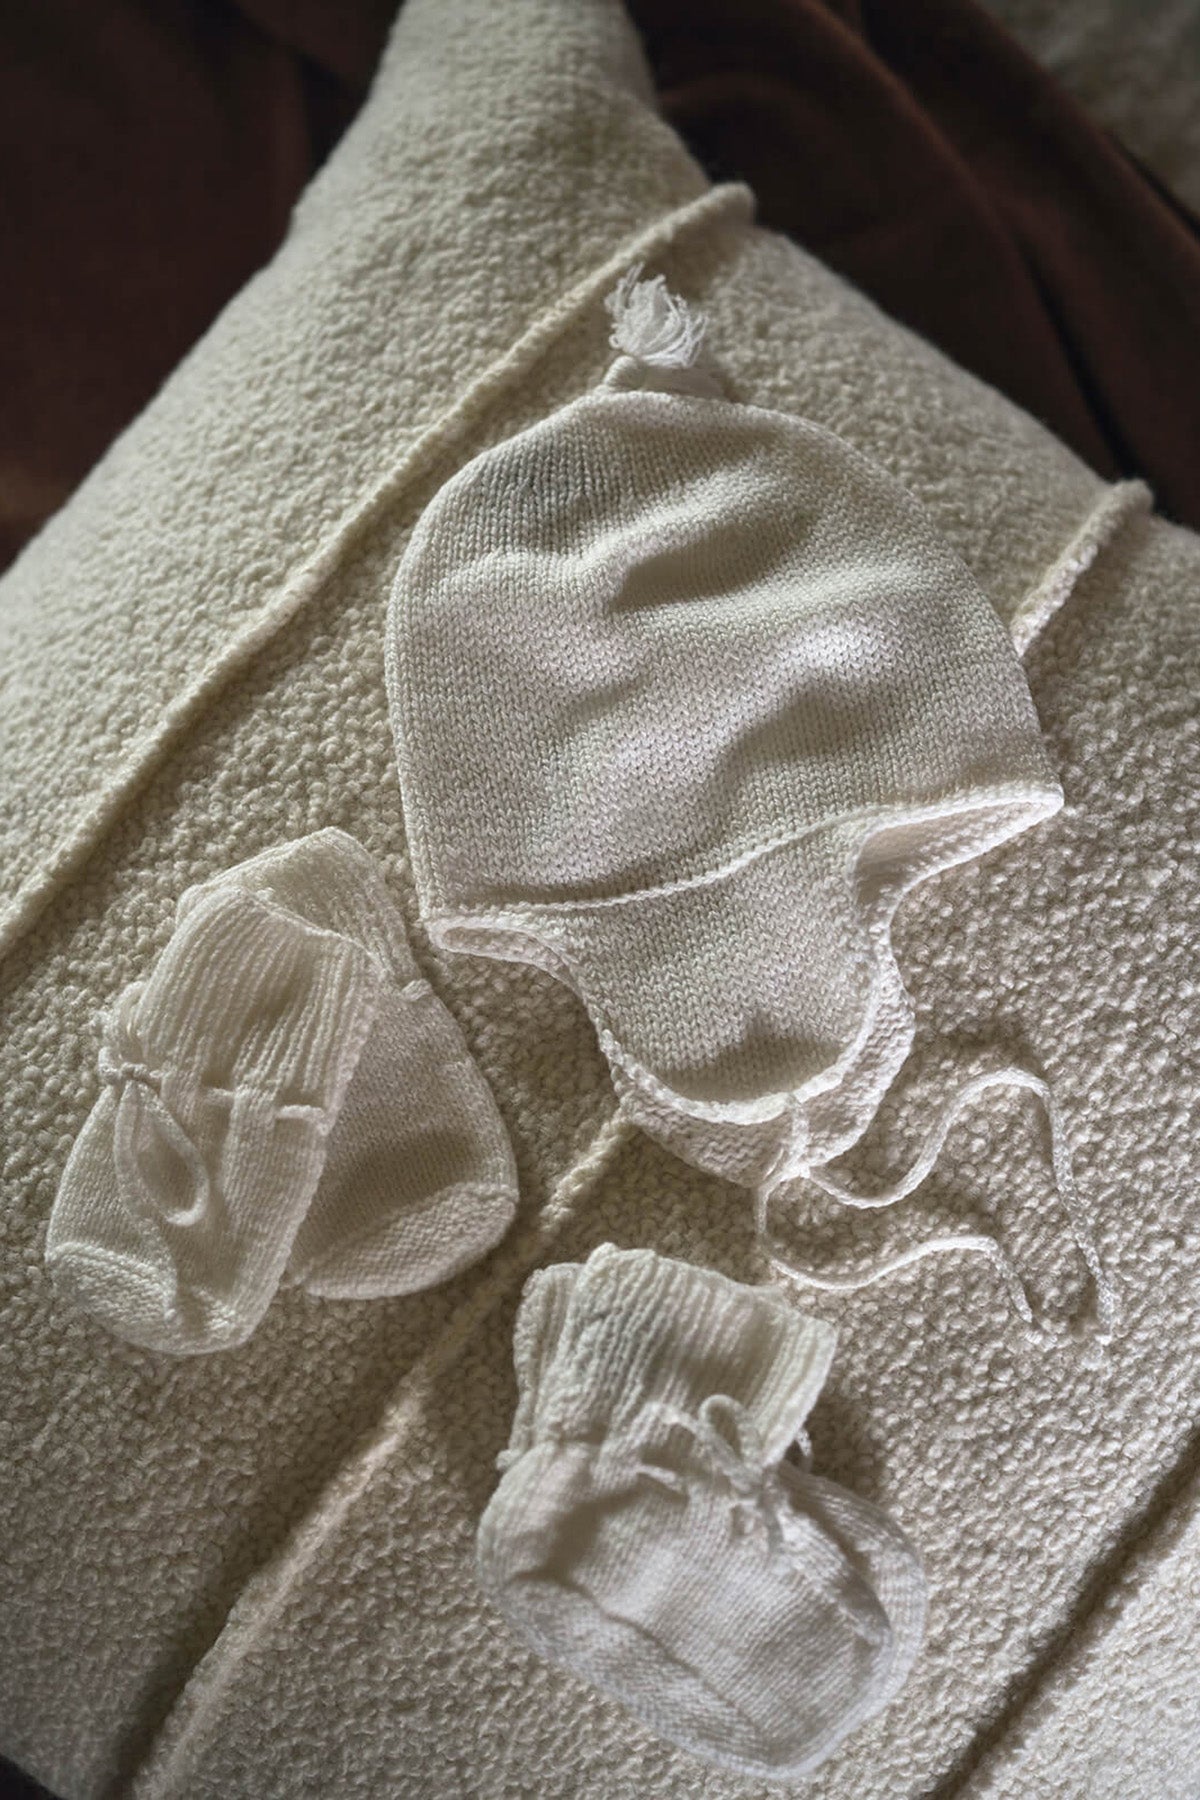 Johnstons of Elgin’s Baby's 1st Cashmere Accessories Gift Set in White on a cream cushion AW21GIFTSET20A